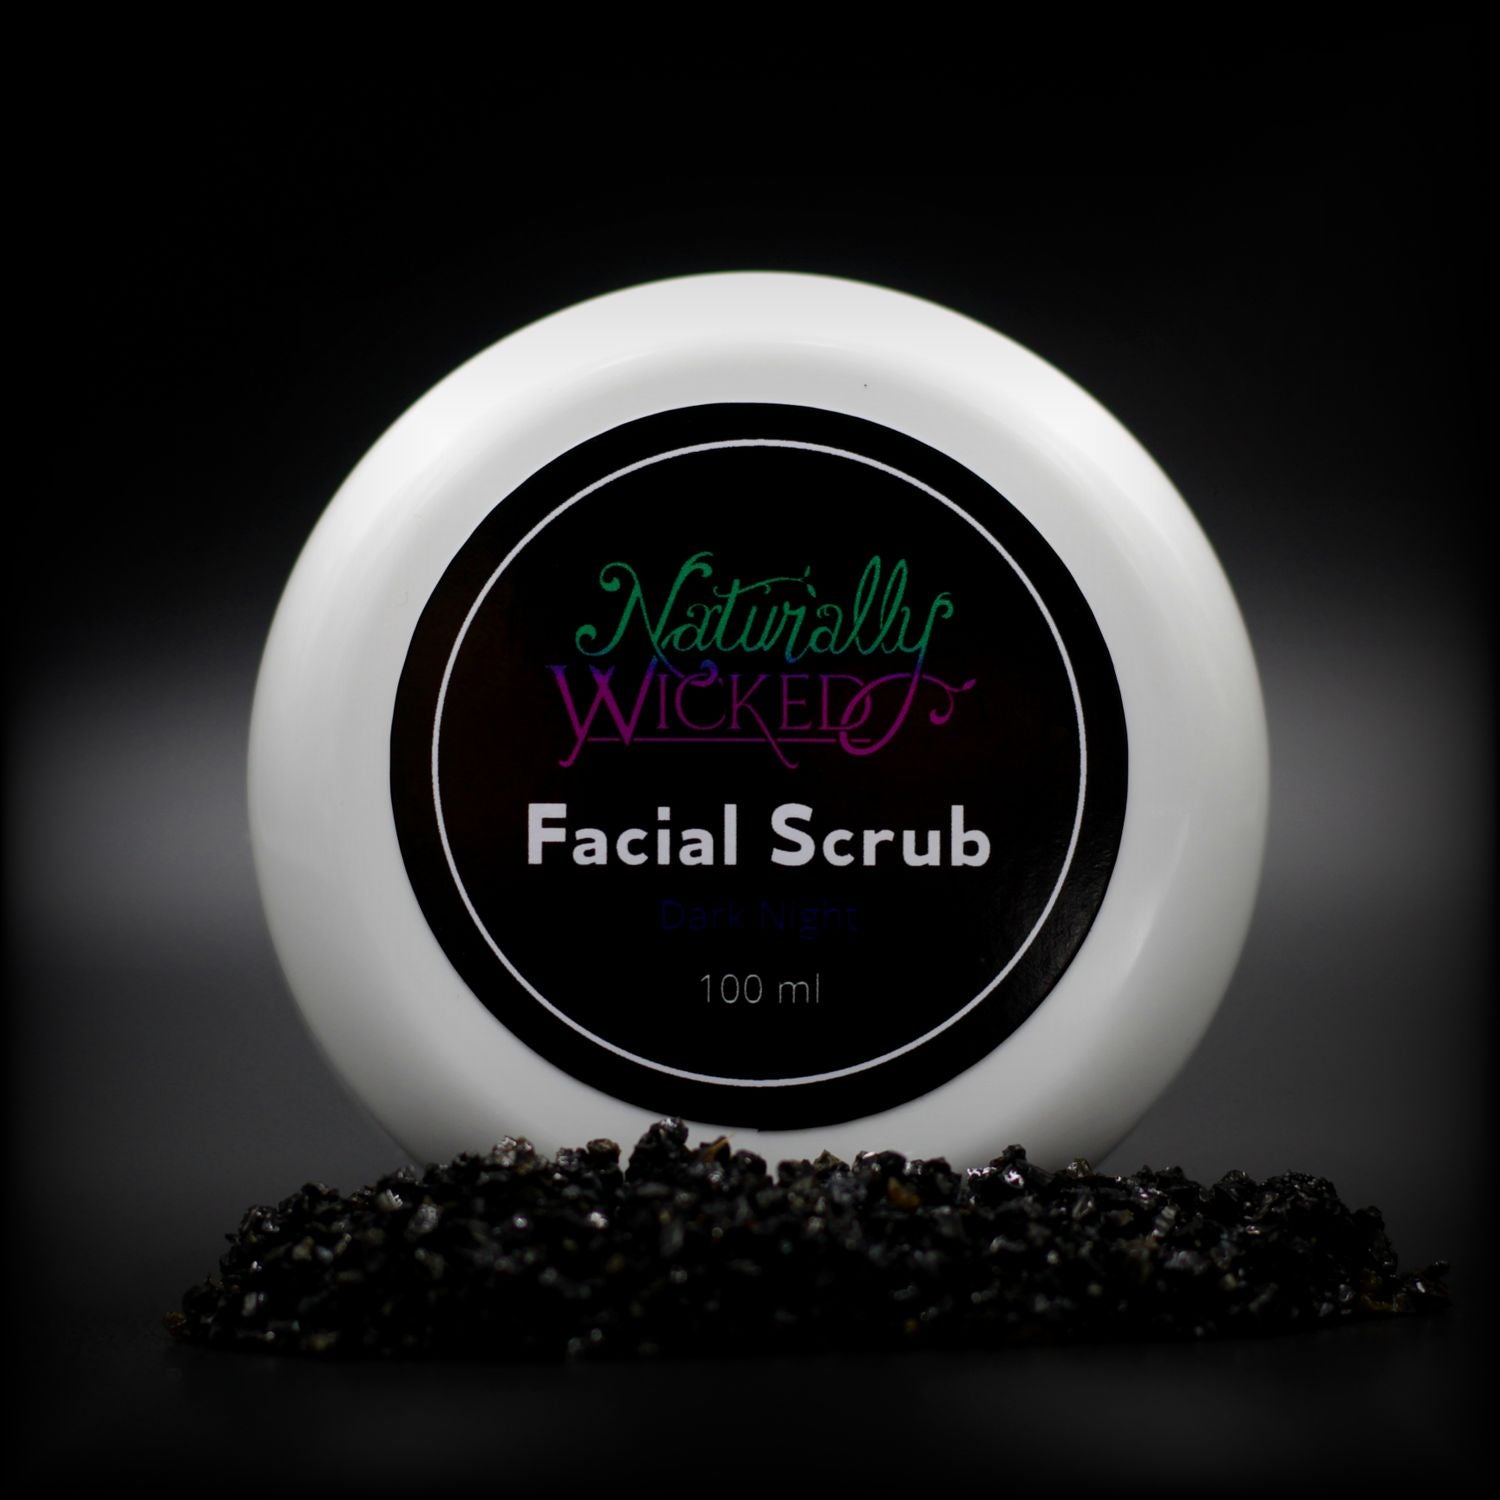 Naturally Wicked Dark Night Facial Scrub Lid Surrounded By Exfoliating Activated Charcoal